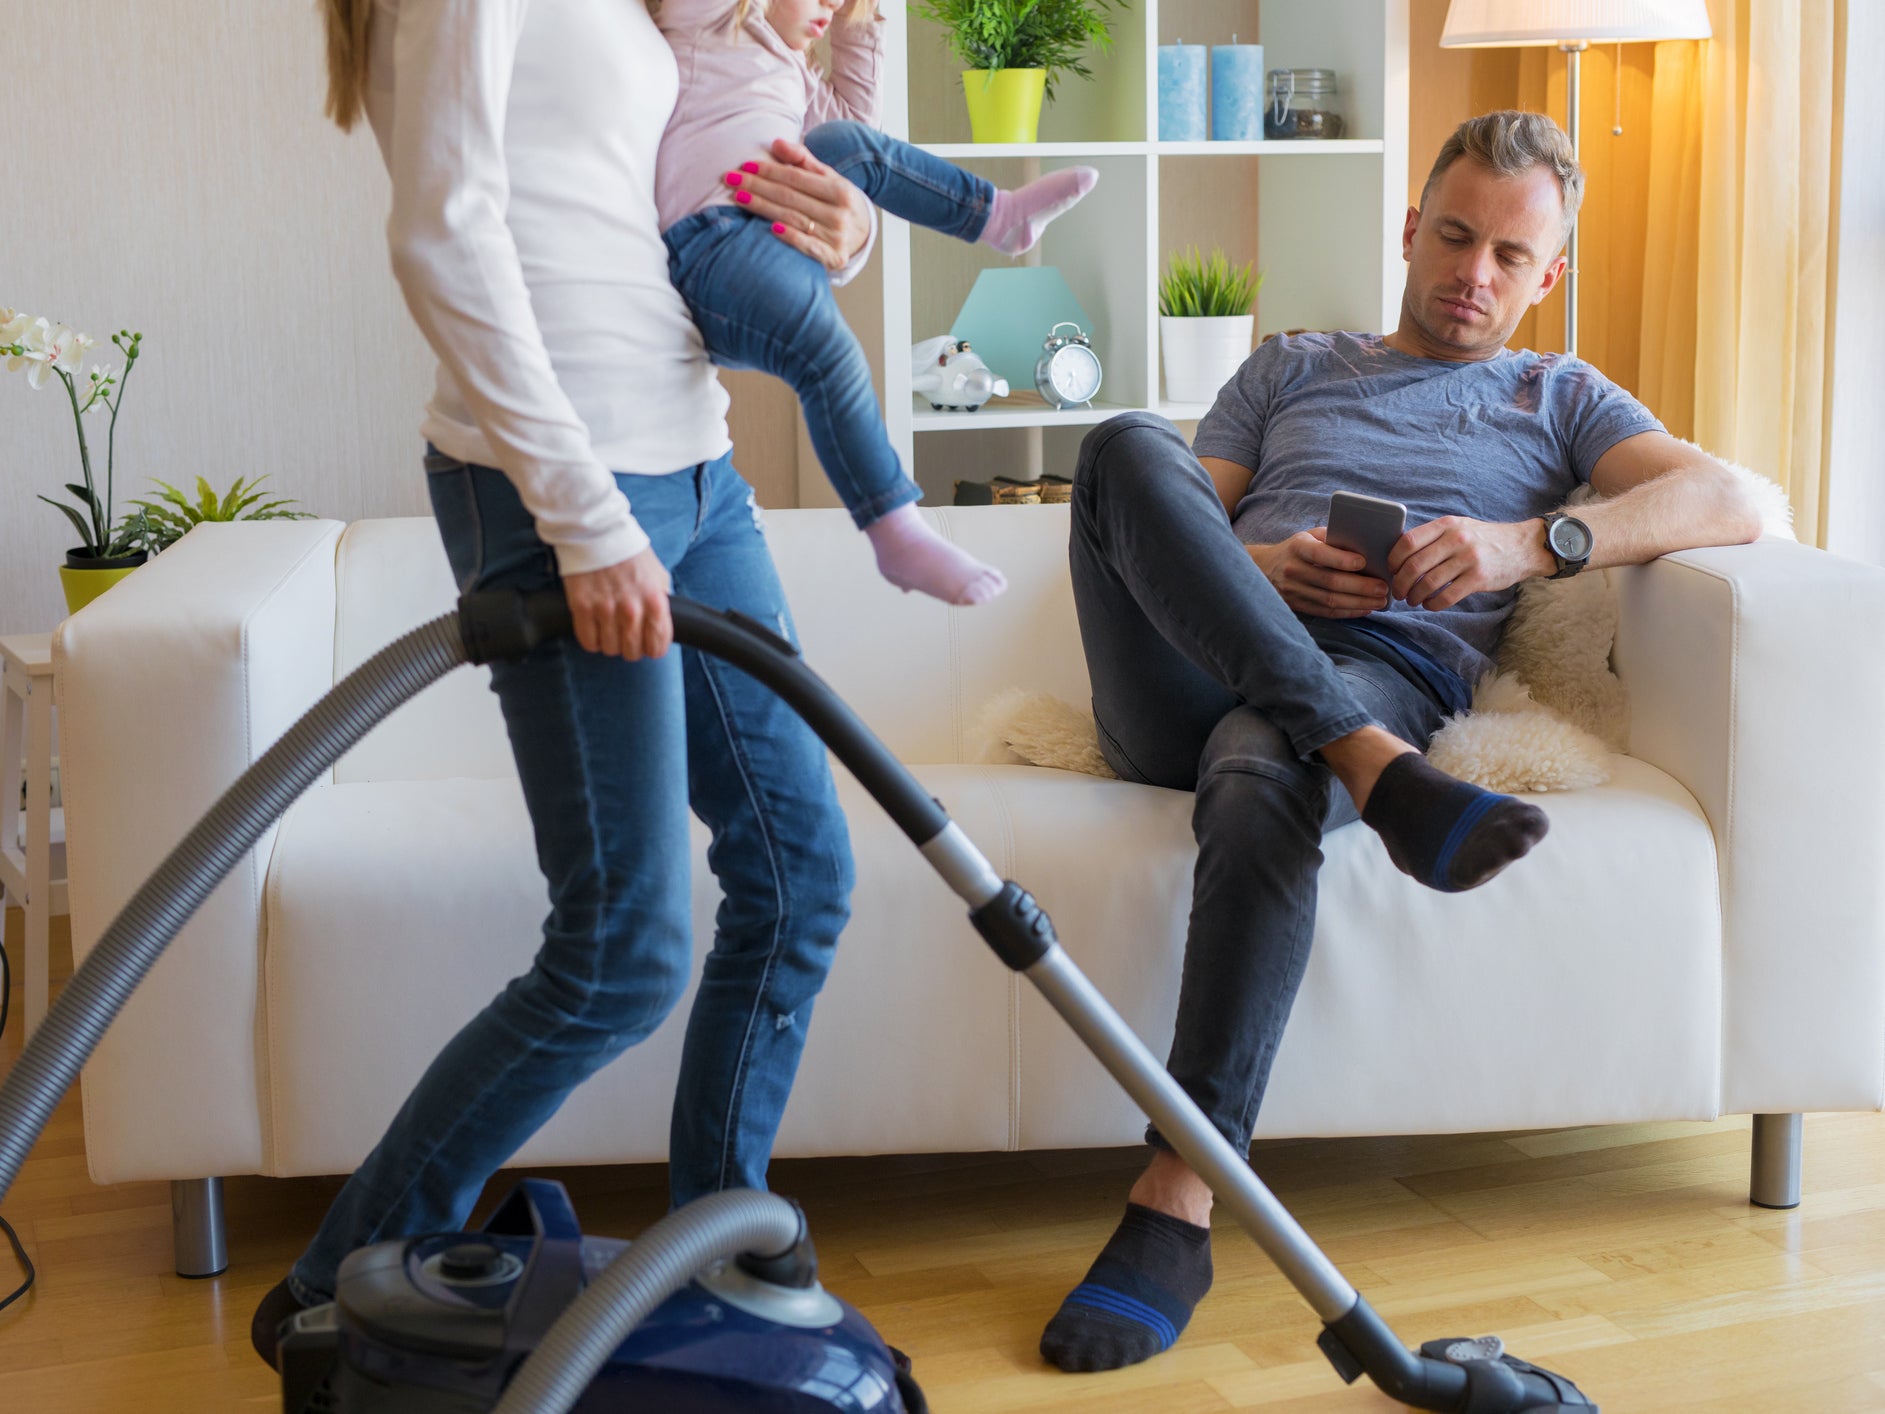 Women Still Do Majority Of Household Chores Study Finds The Independent The Independent